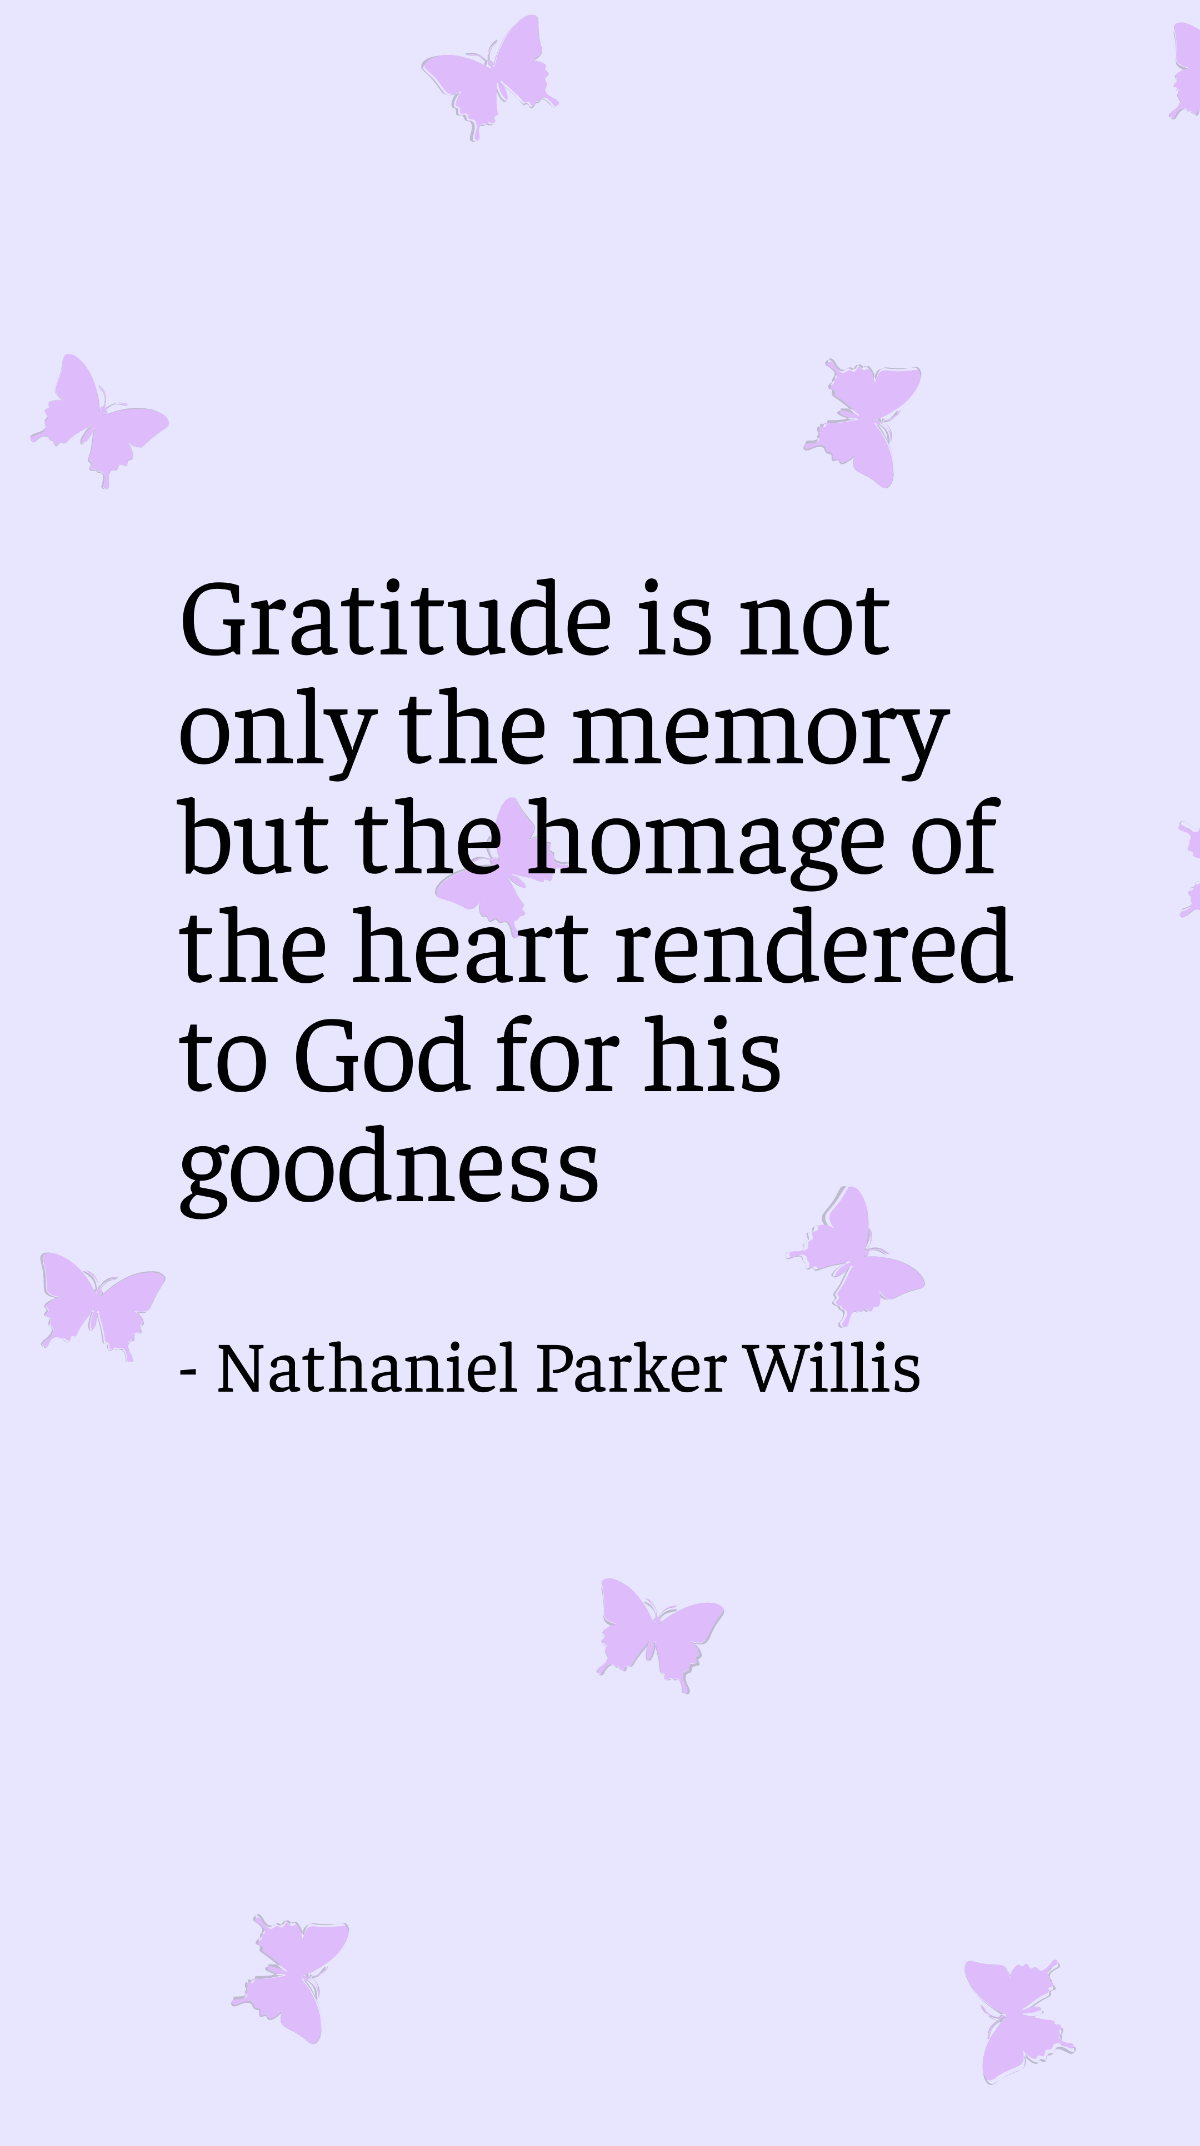 Nathaniel Parker Willis - Gratitude is not only the memory but the homage of the heart rendered to God for his goodness Template